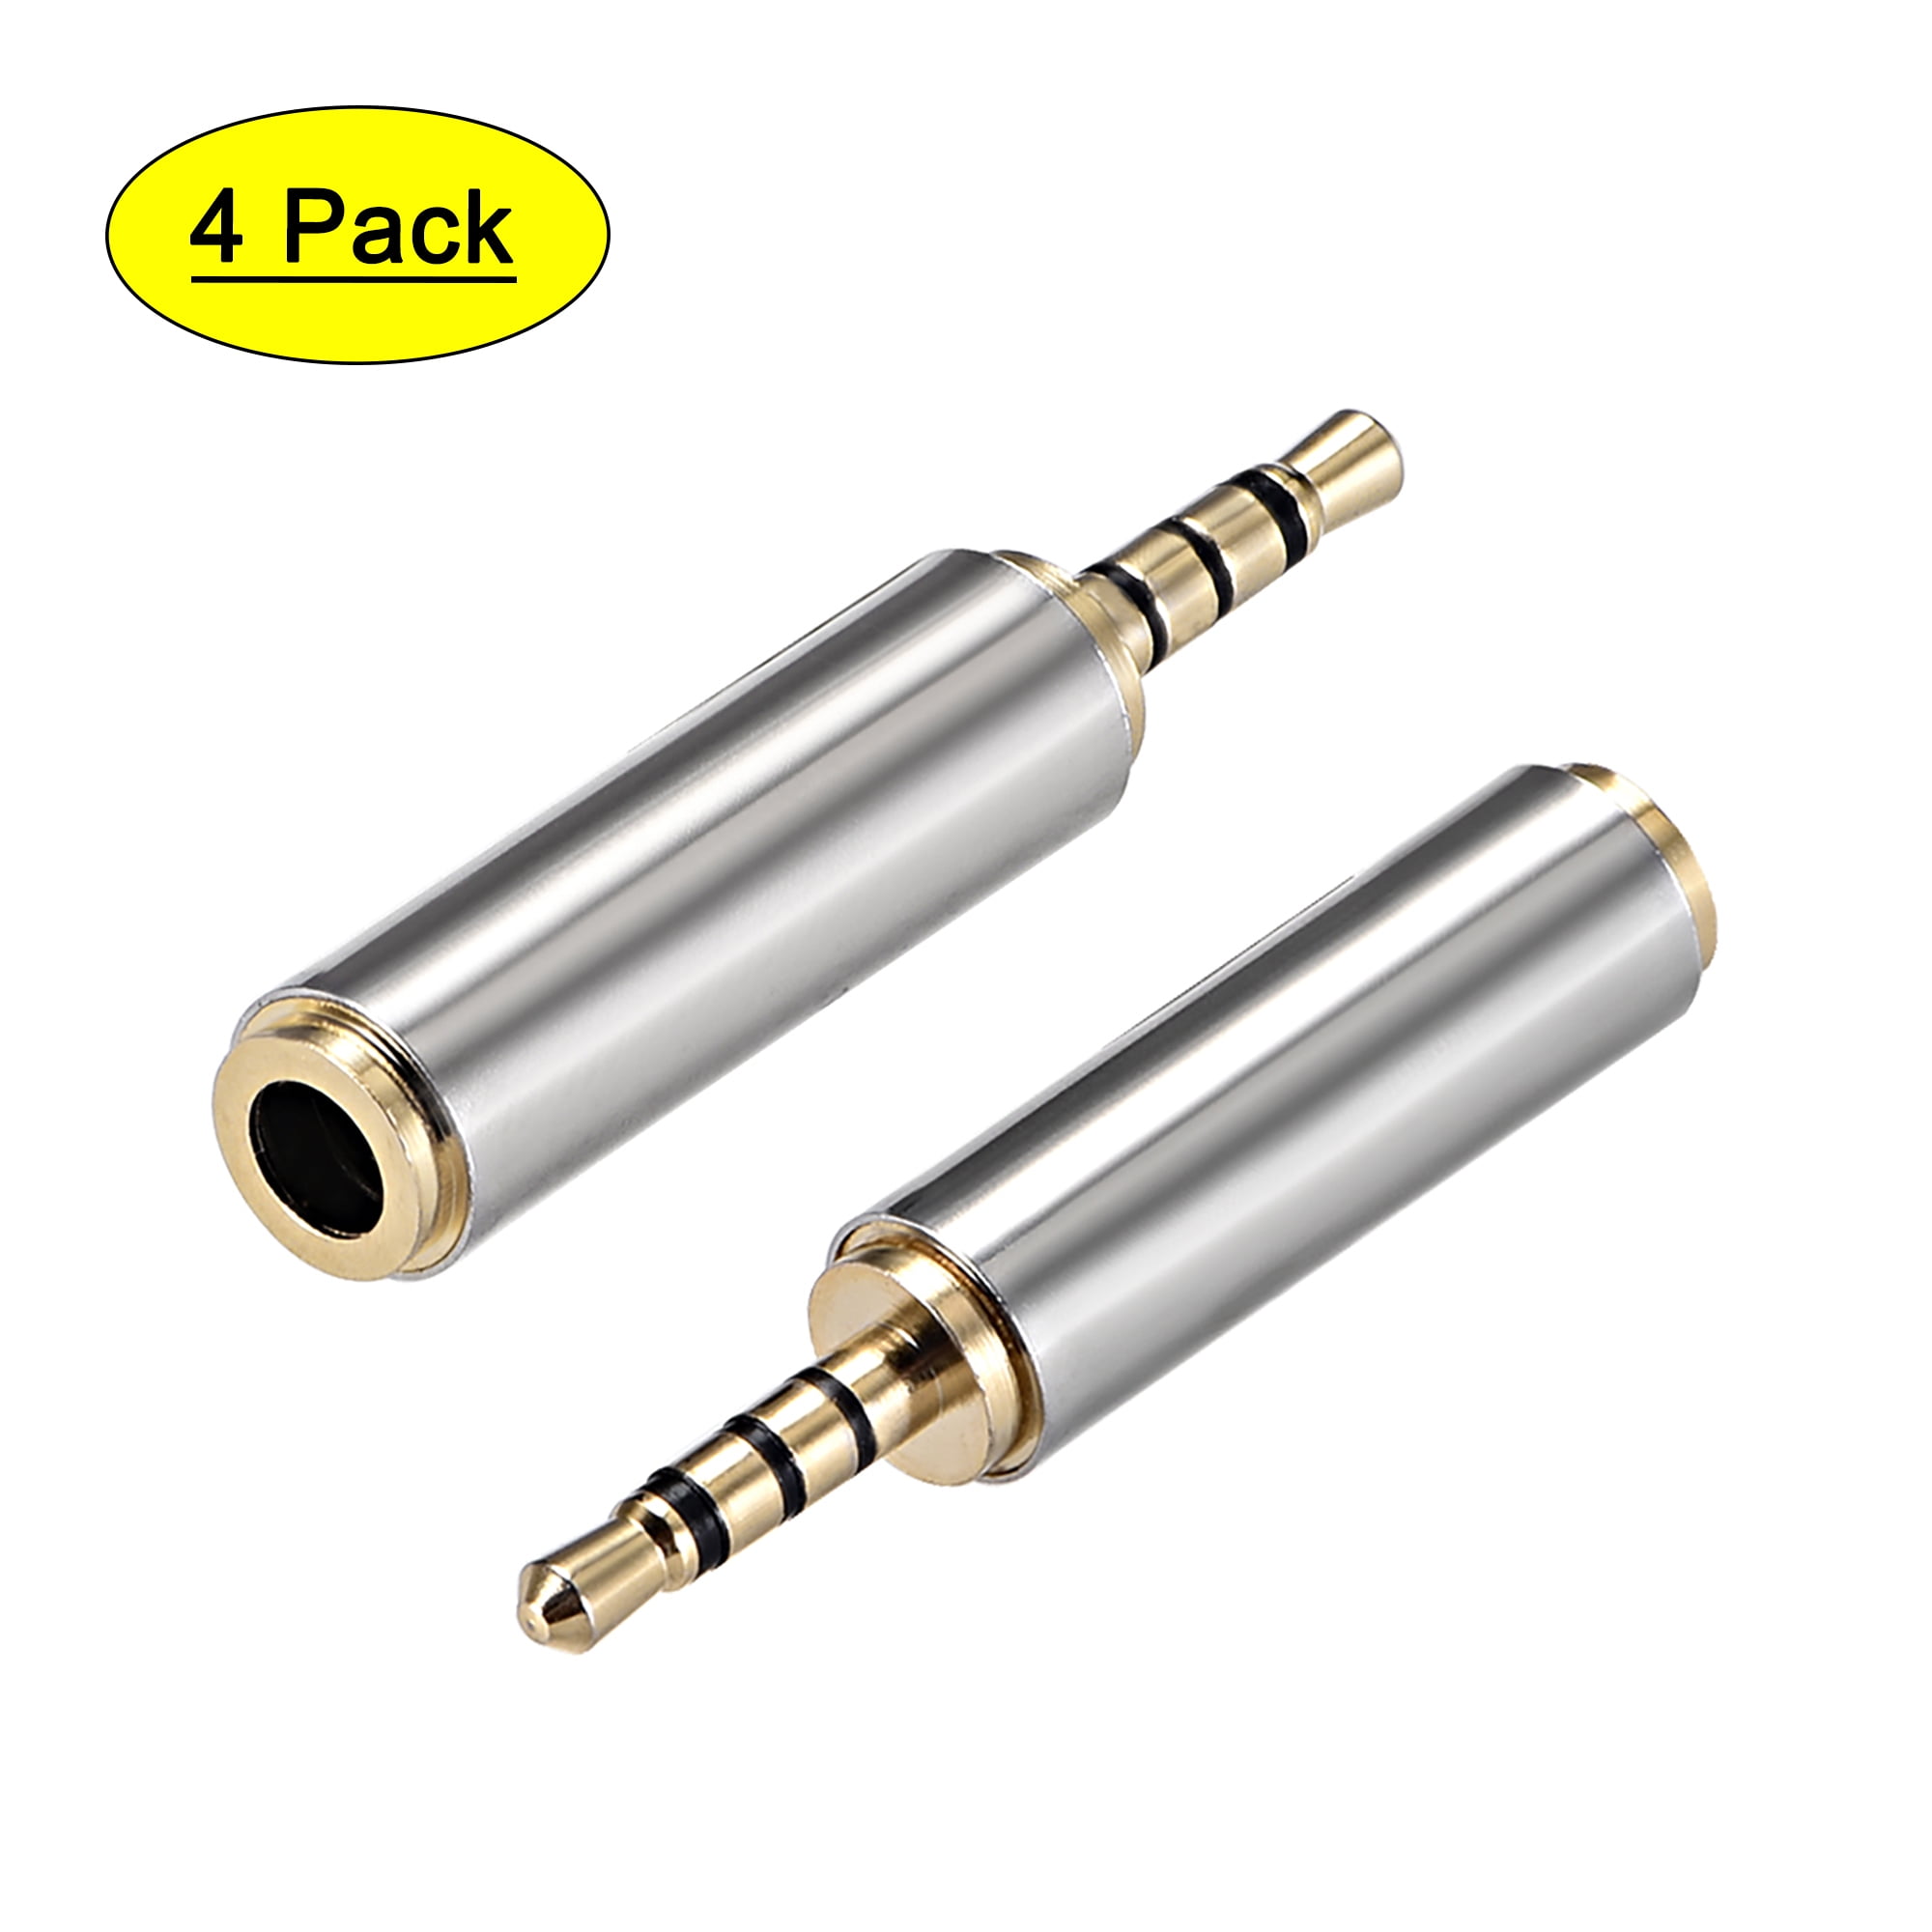 3.5mm Stereo 4 Pole Male to 2.5mm Female Adapter Coupler Converter Zinc Alloy